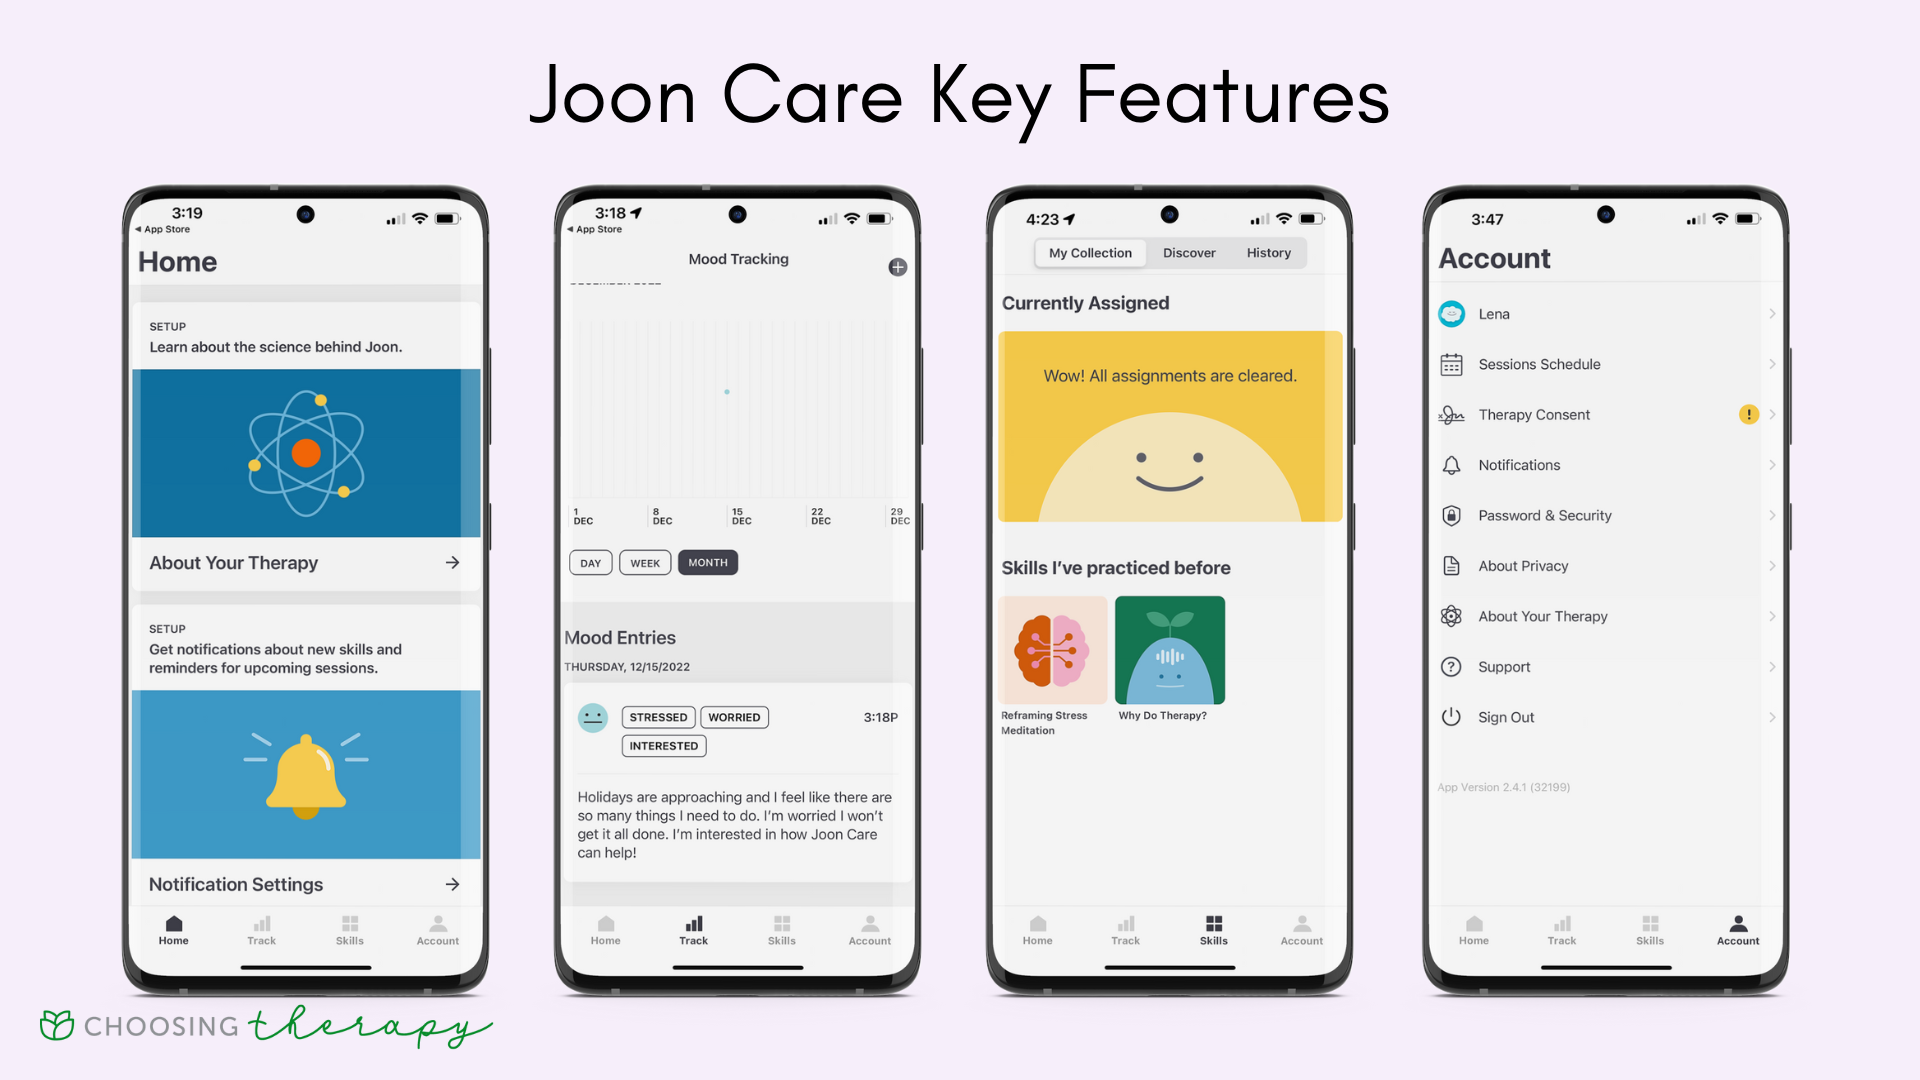 Joon Care Review 2023 - Image of the key features in the Joon Care app, home screen, mood tracking, self-care skills, and account